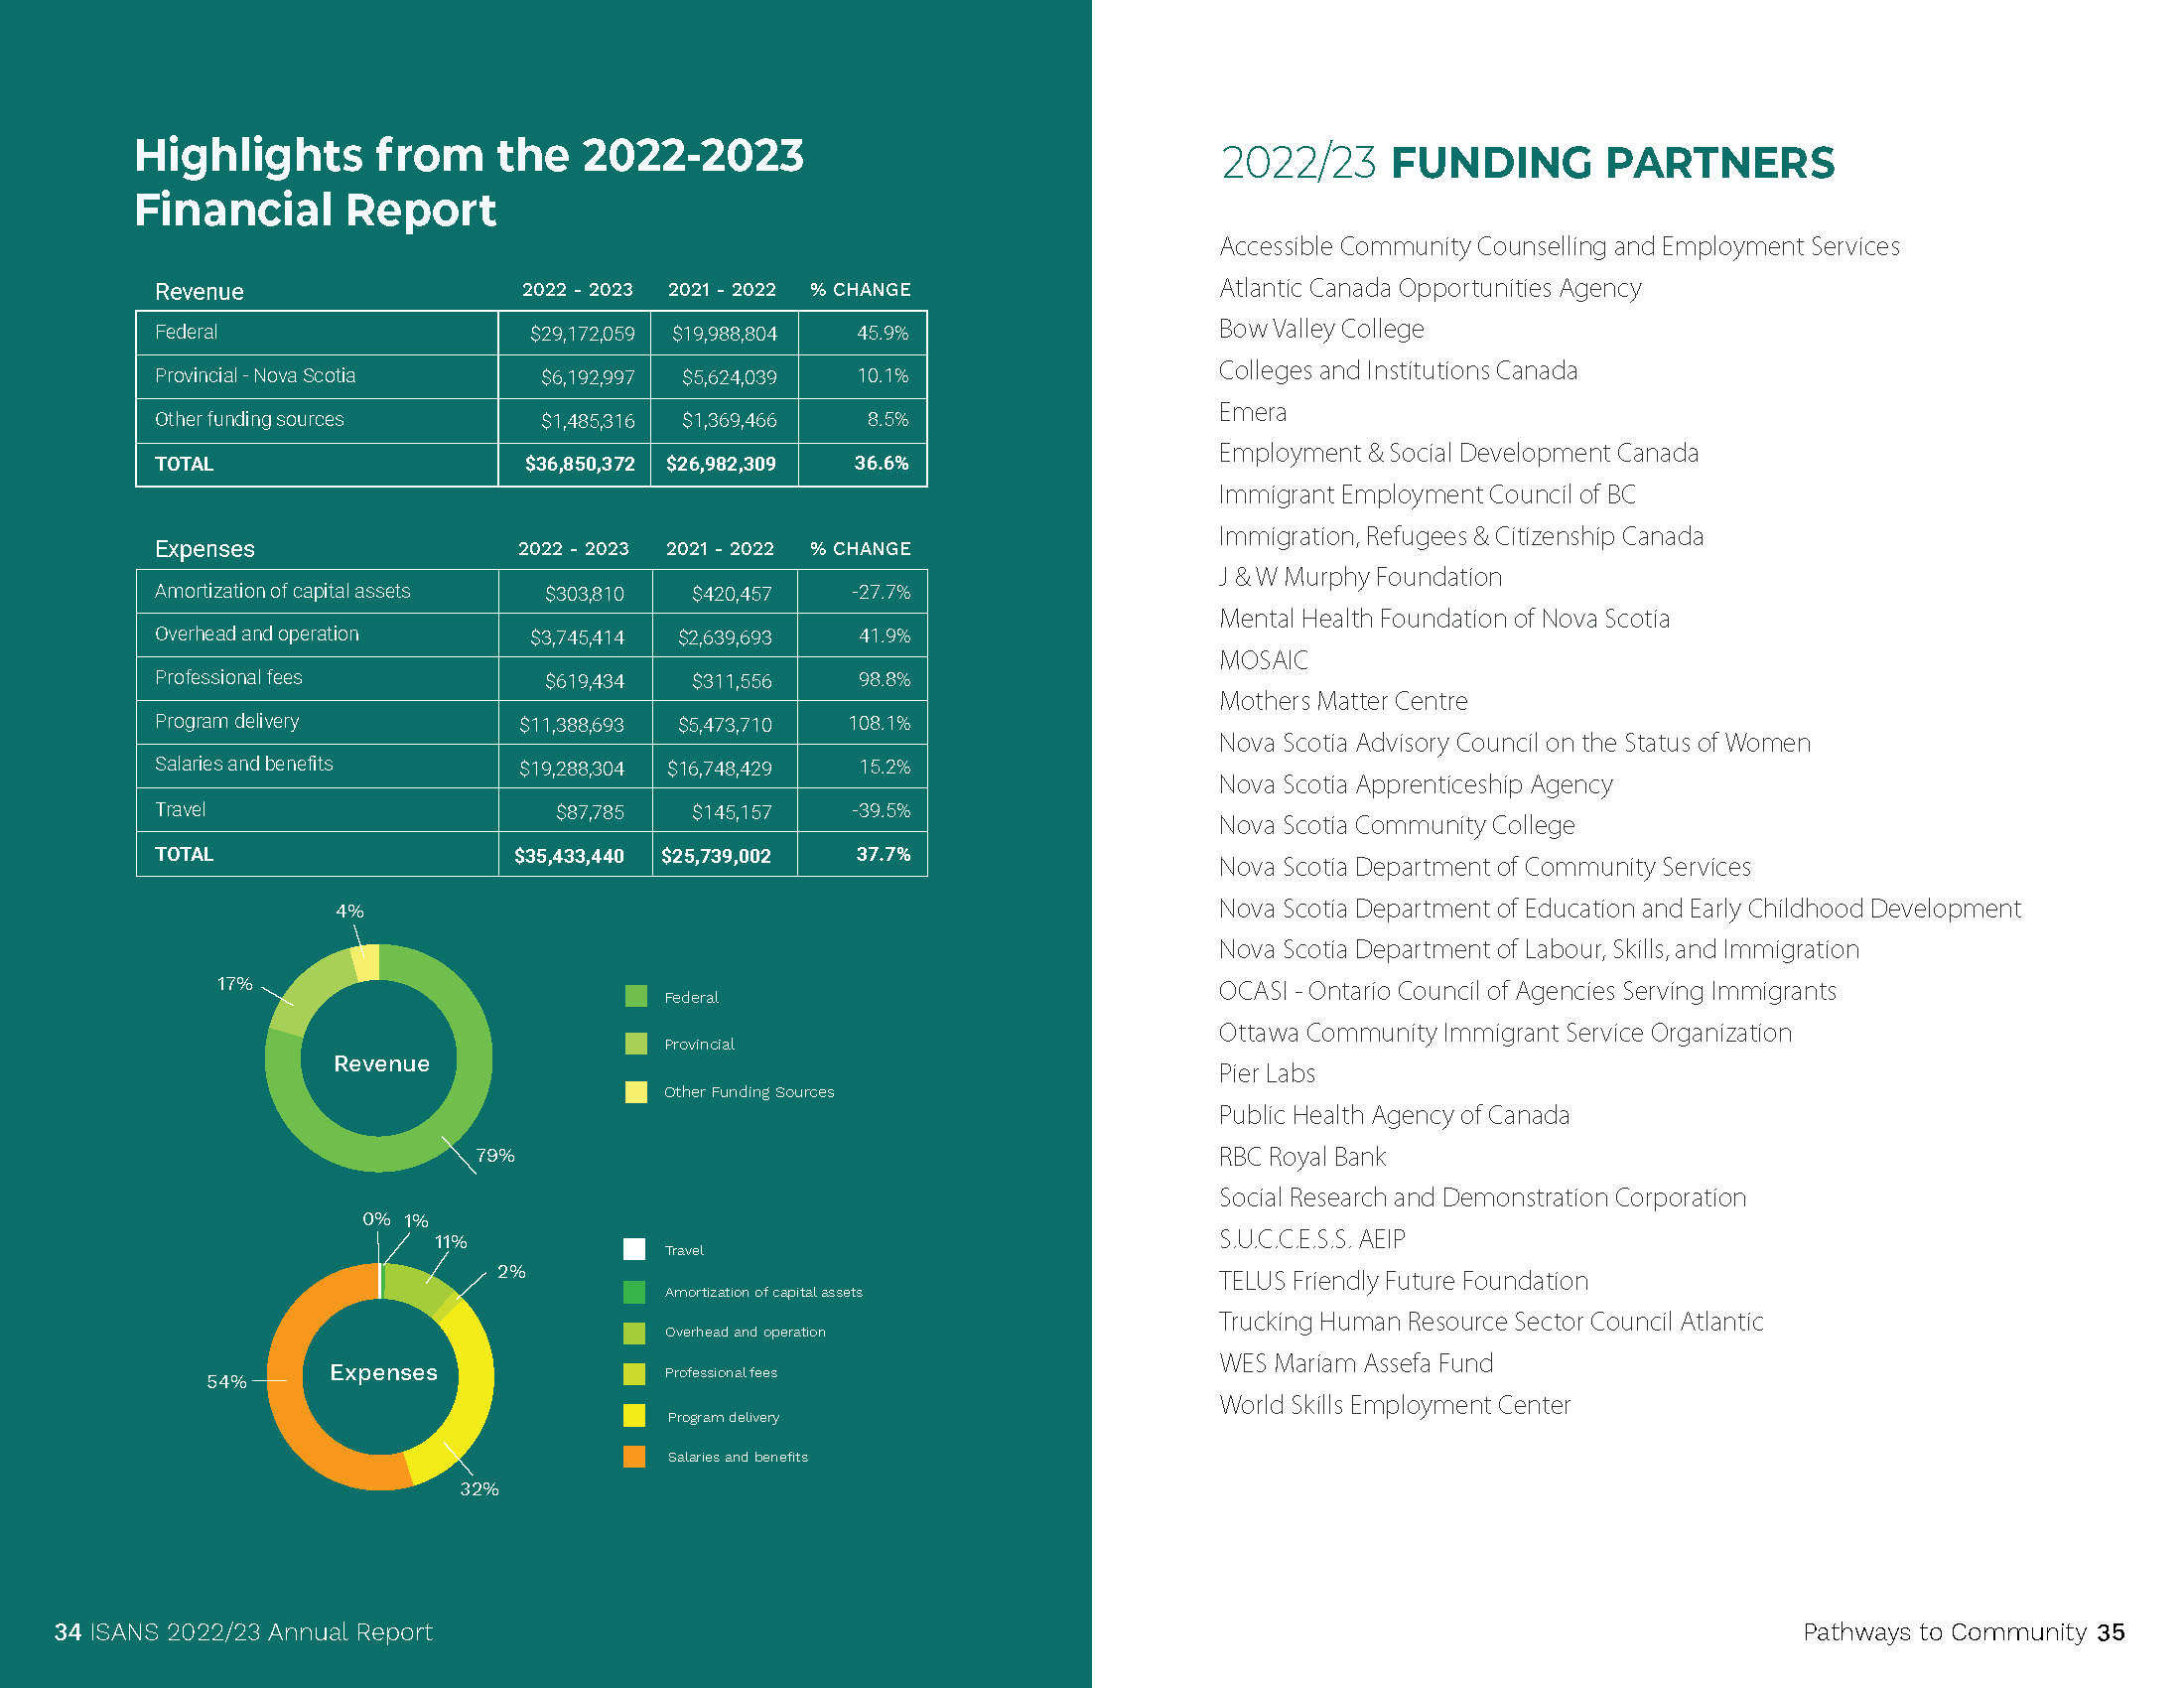 Pathways to Community ISANS Annual Report 22-23_Financial Report